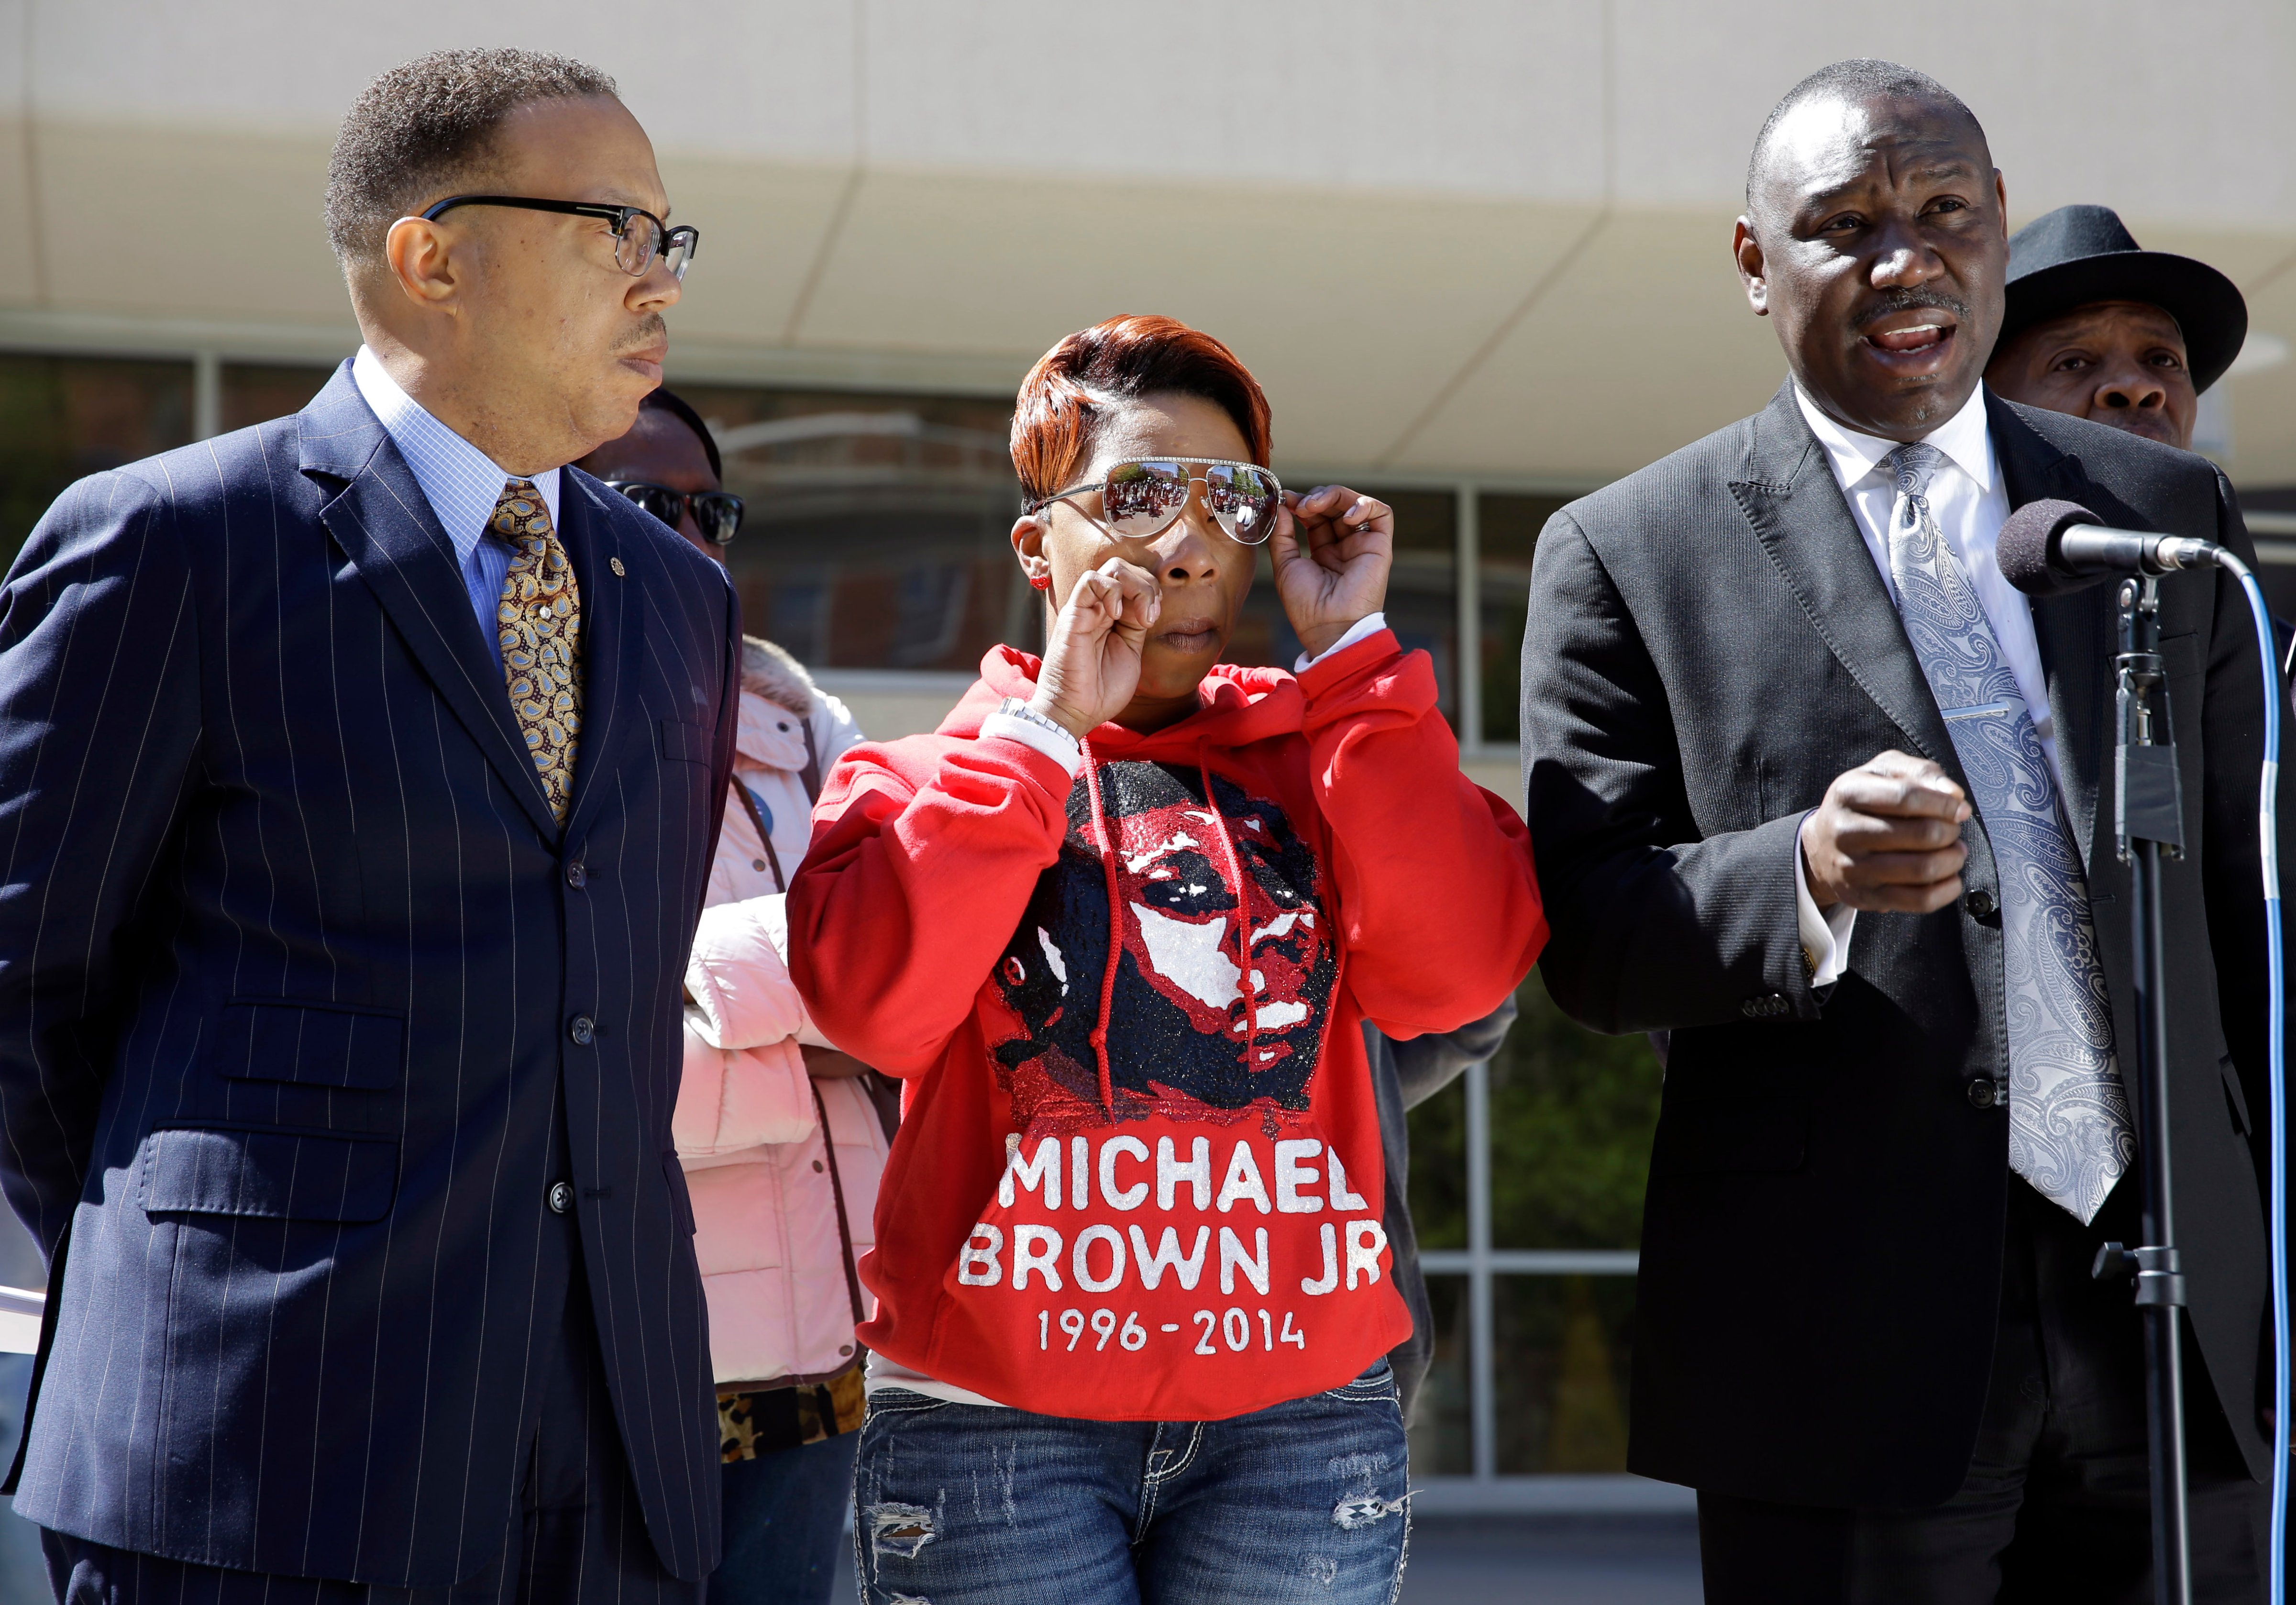 Lesley McSpadden, mother of Michael Brown, wipes her eye as she is flanked by her attorneys Anthony D. Gray, left, and Benjamin L. Crump, right, during a news conference April 23, 2015, in Clayton, Mo. (Jeff Roberson—AP)